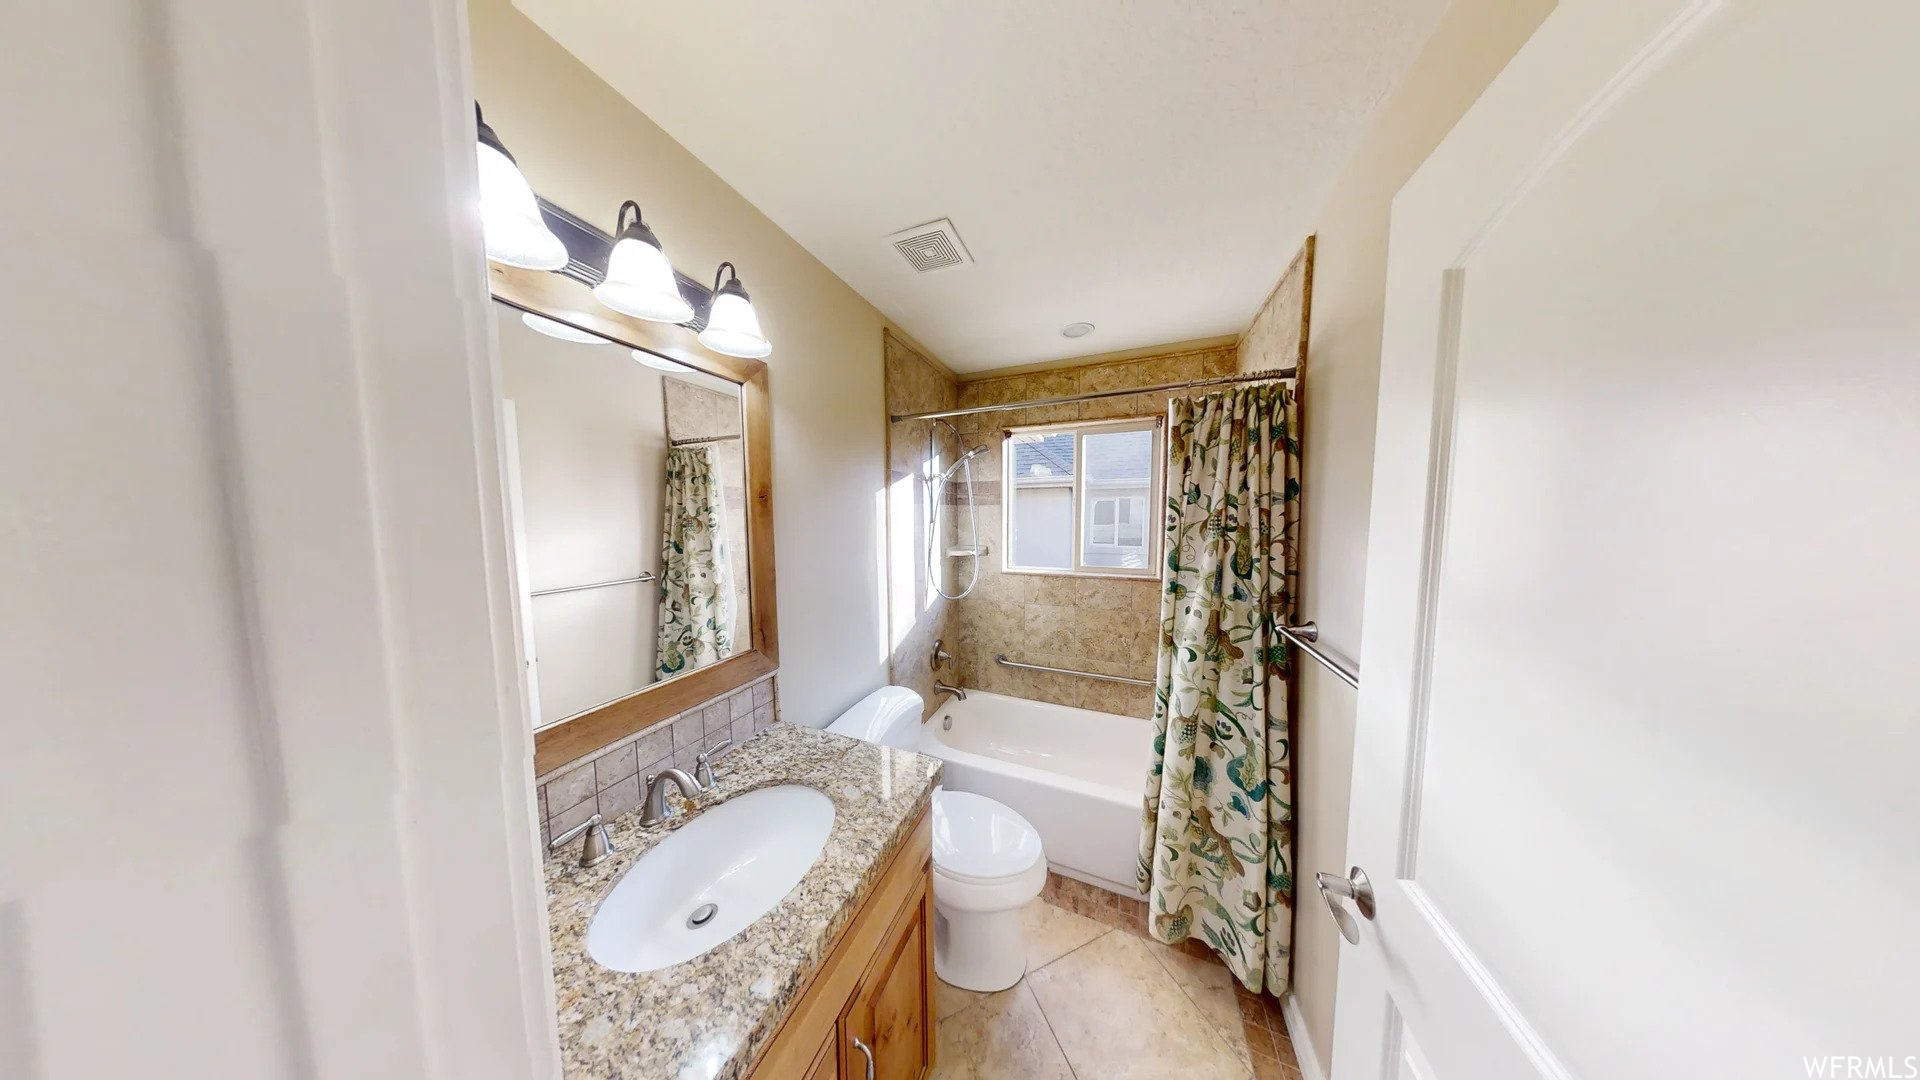 Full bathroom featuring toilet, shower / tub combo, large vanity, and tile flooring